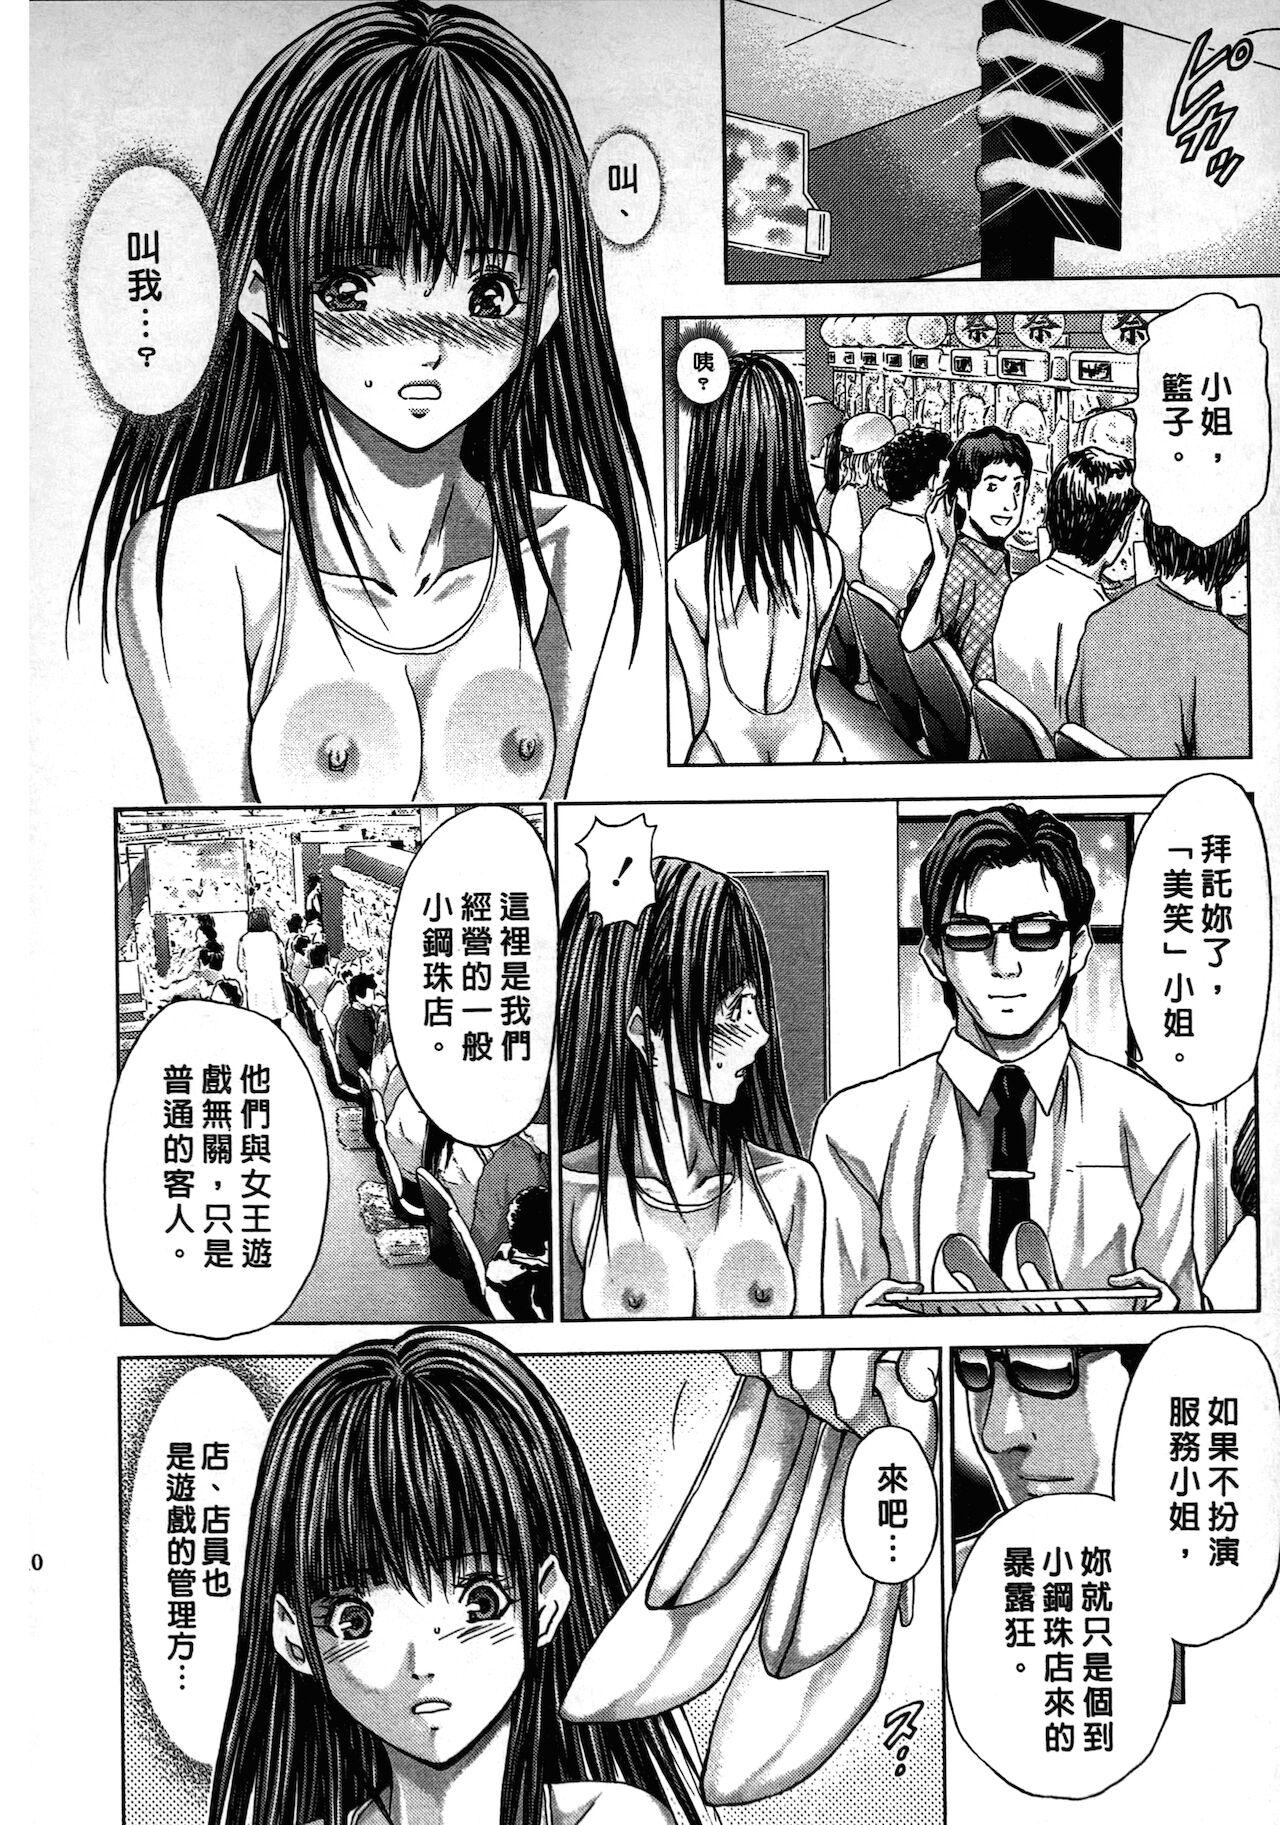 Top [Adachi Takumi] Queen's Game ~Haitoku no Mysterious Game~ 2 | 女王遊戲 ~背德的詭譎遊戲~ 2 [Chinese] Female Orgasm - Page 10